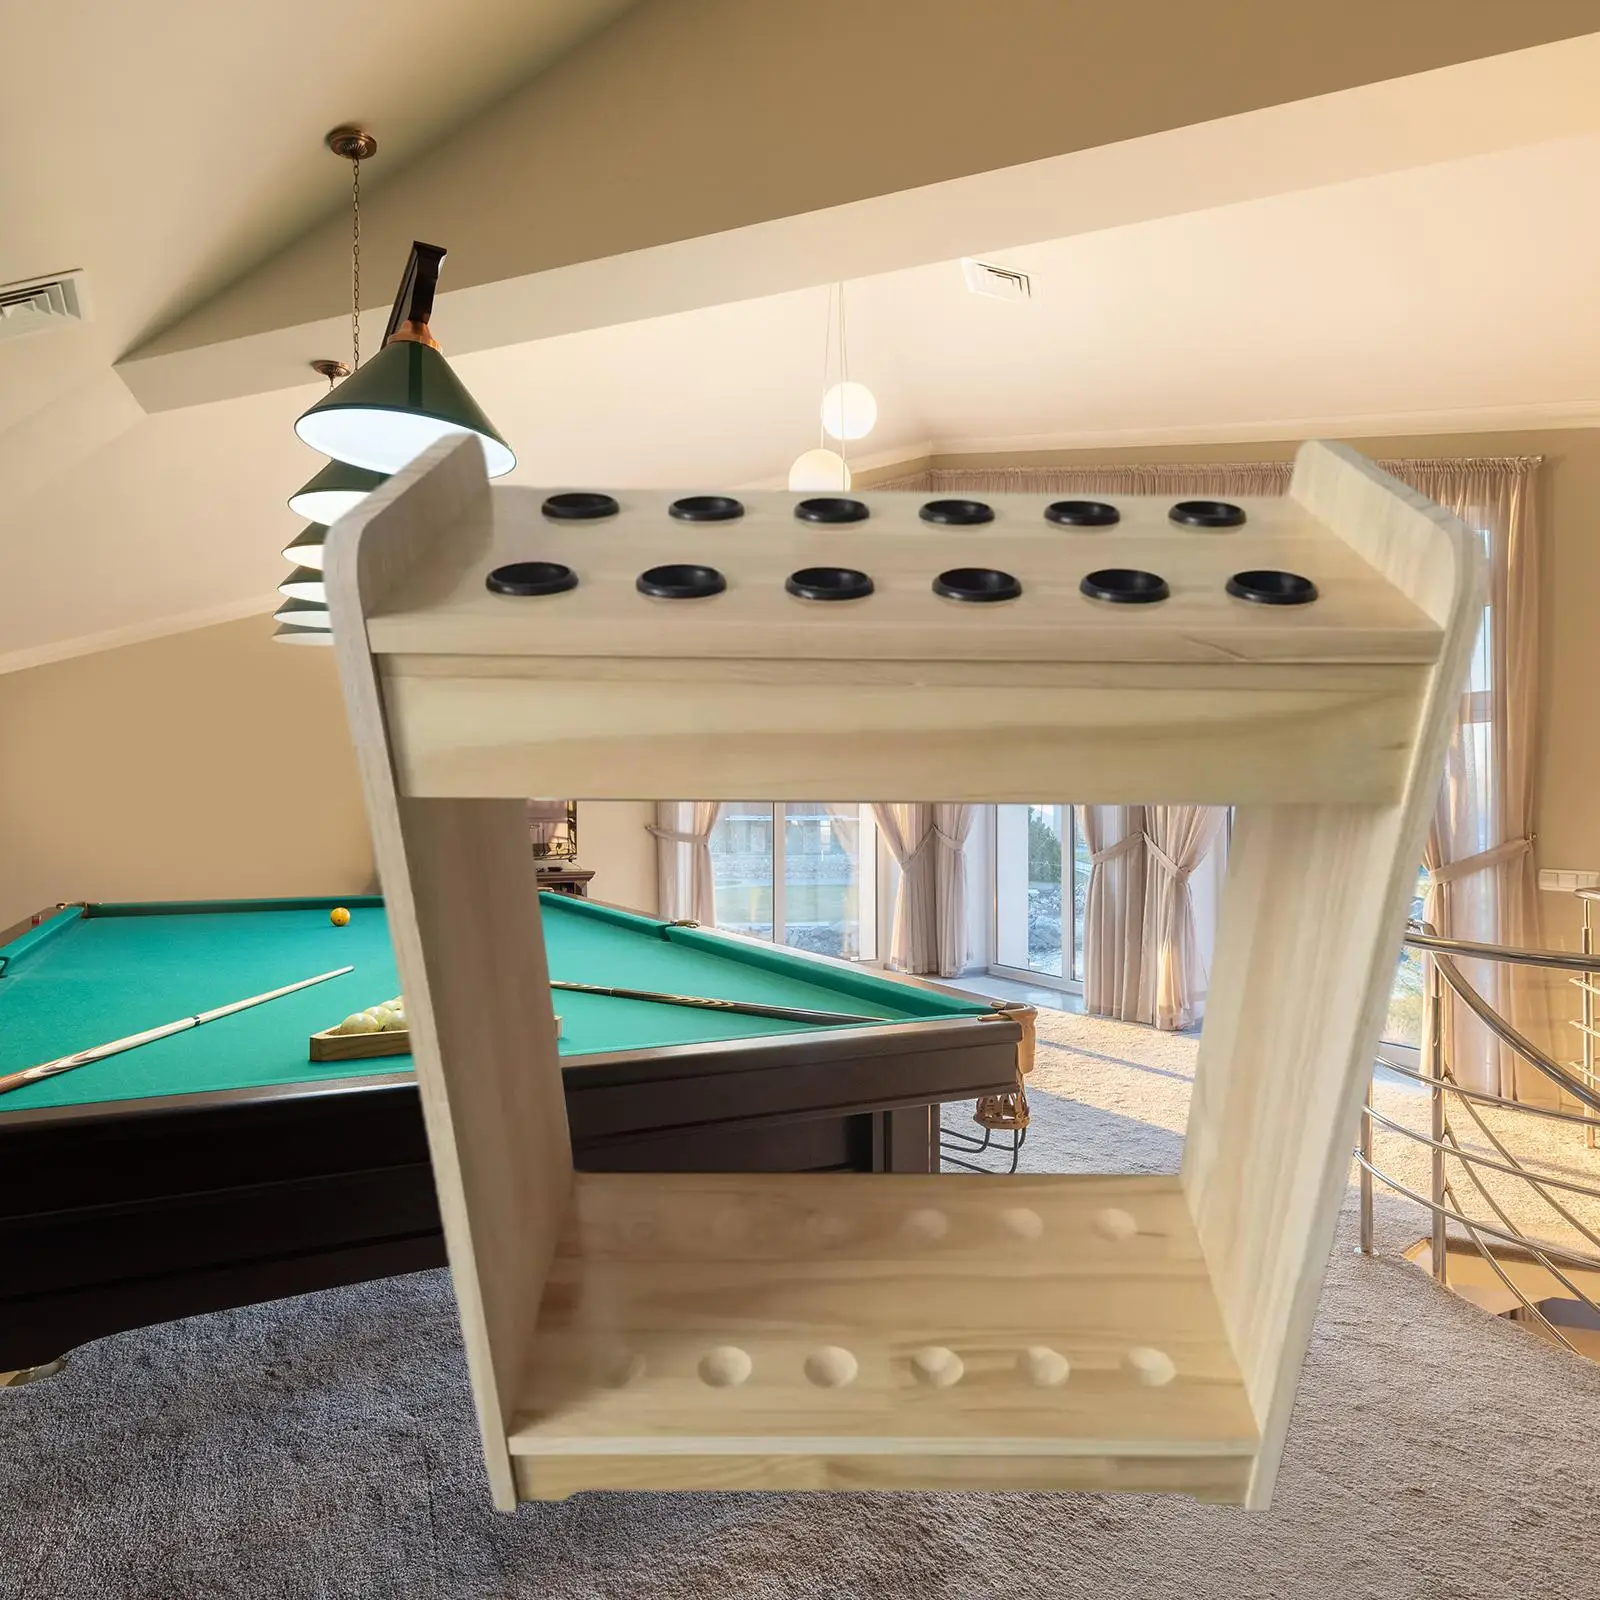 Portable Pool Rack, 12 Holes, Freestanding Pool Table, Wooden Accessories